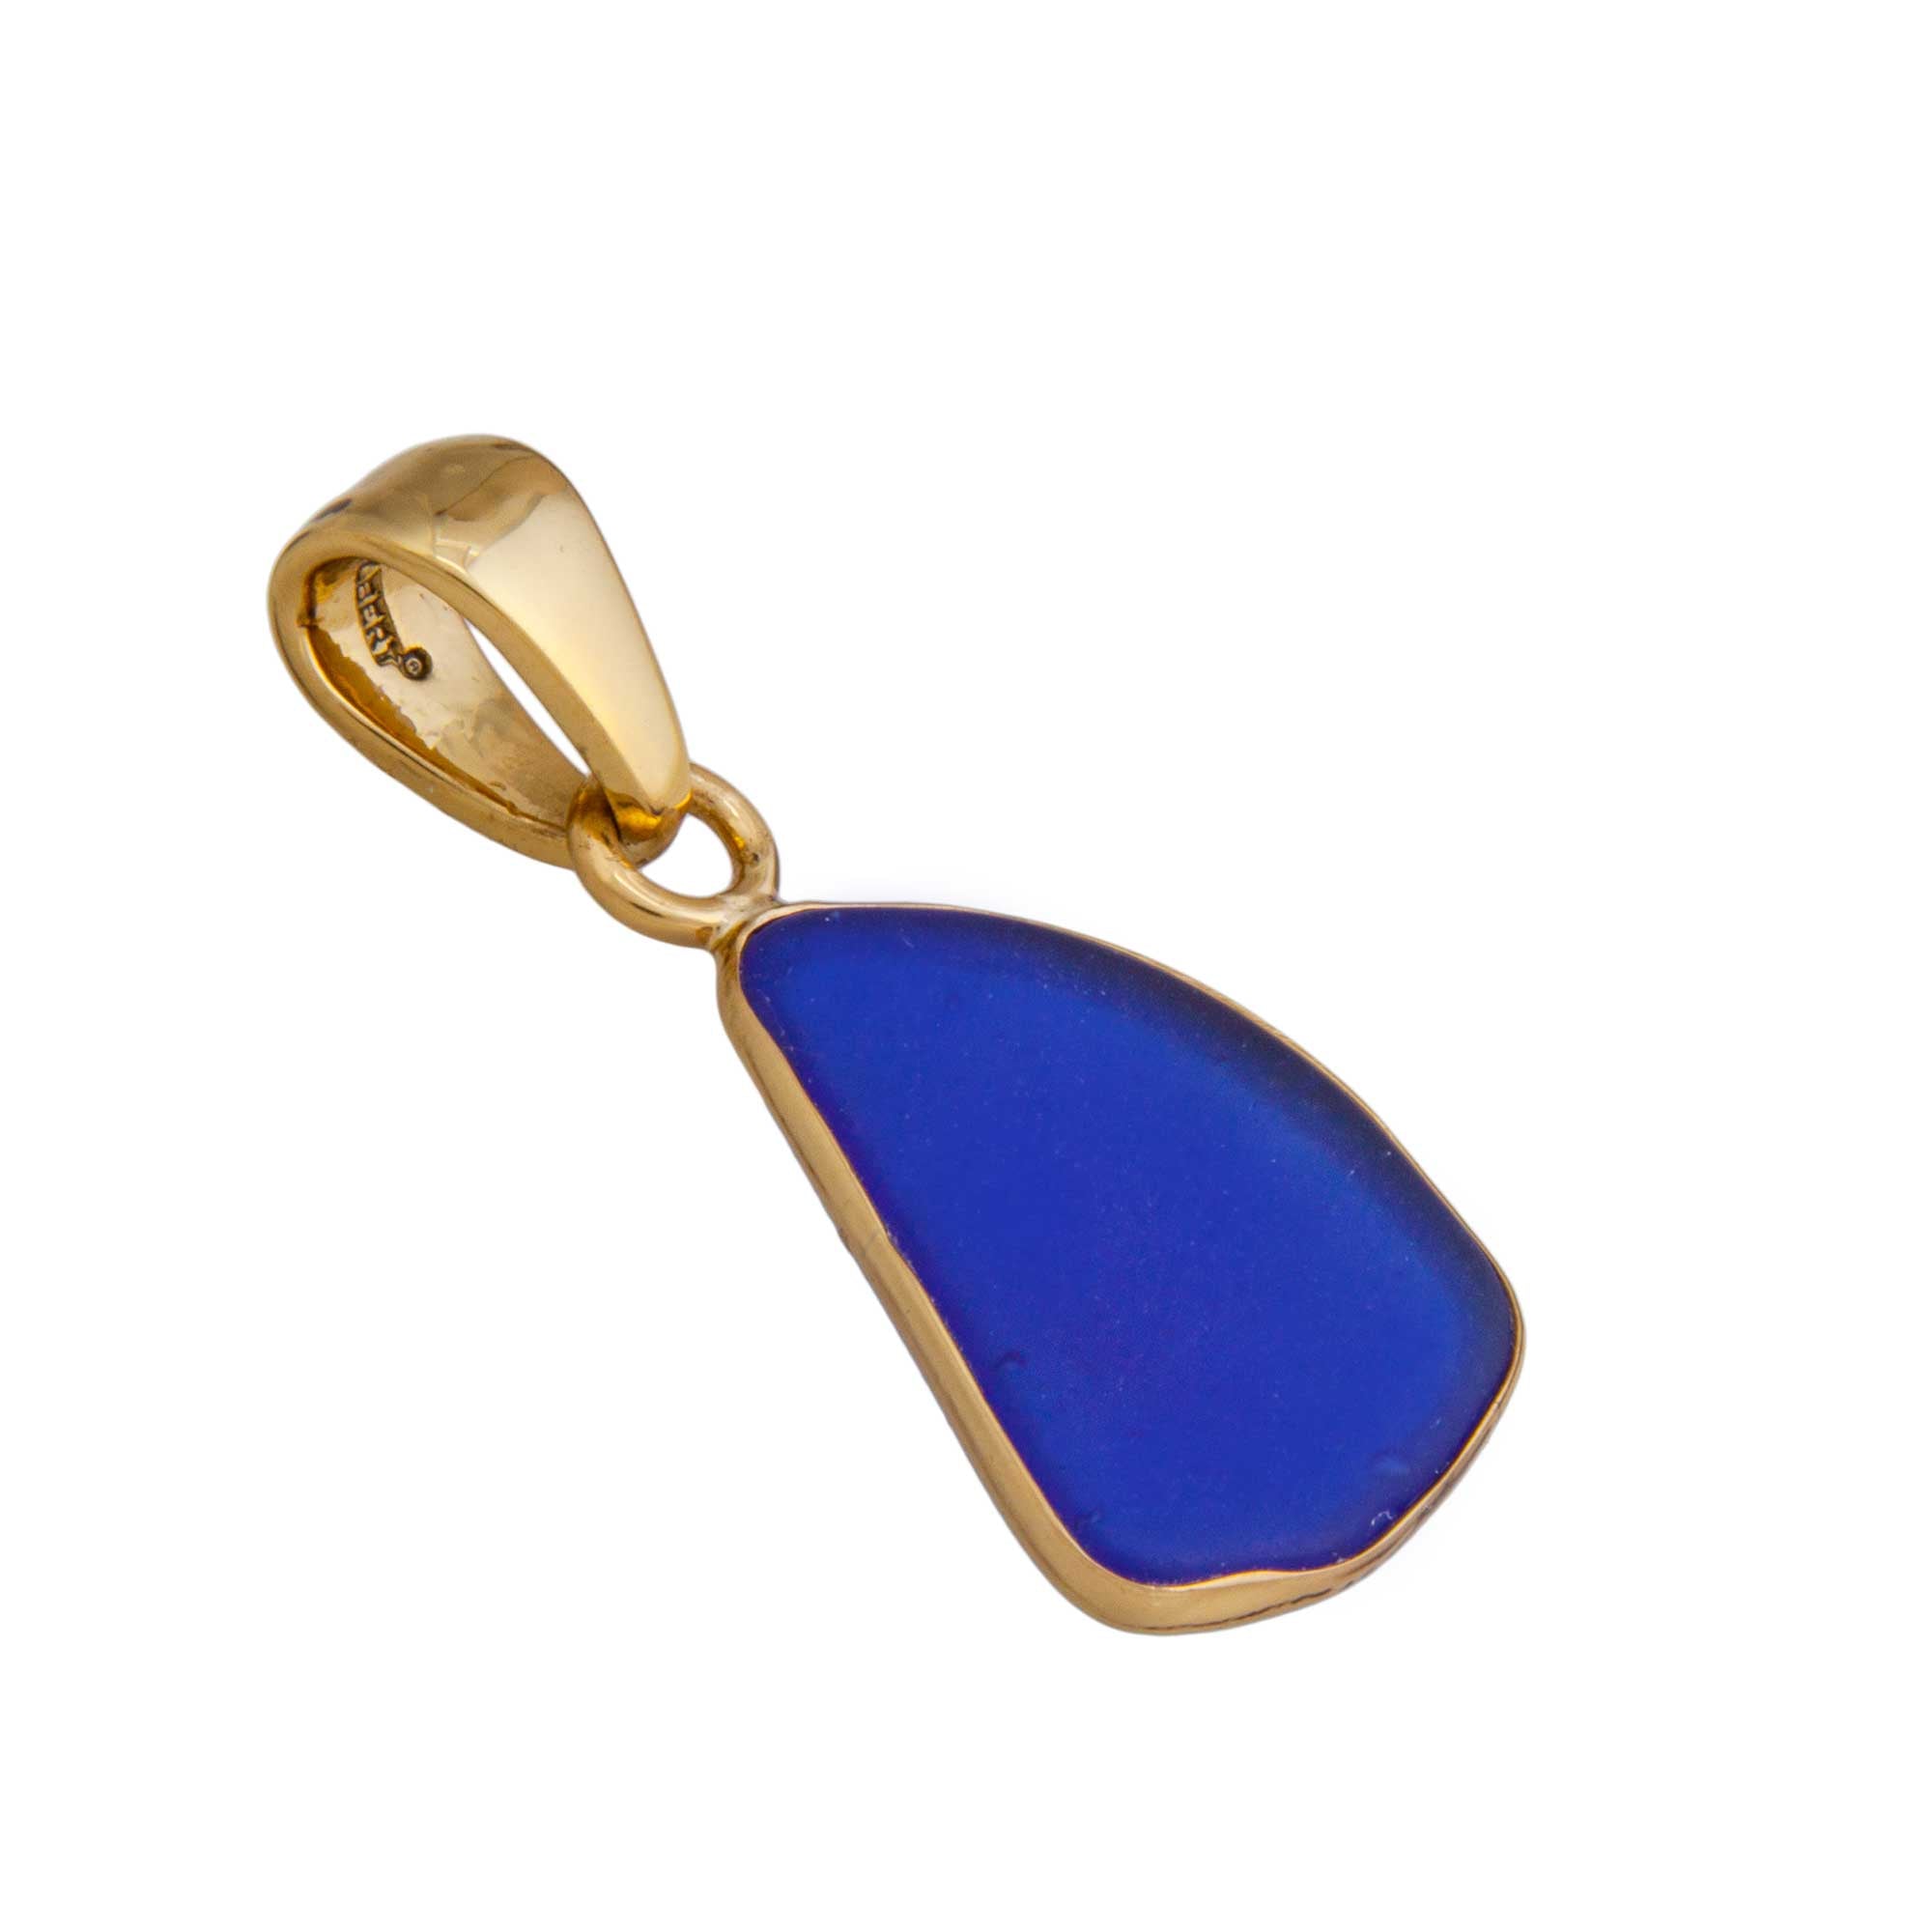 Charles Albert Jewelry - Alchemia Cobalt Recycled Glass Pendant - Side View